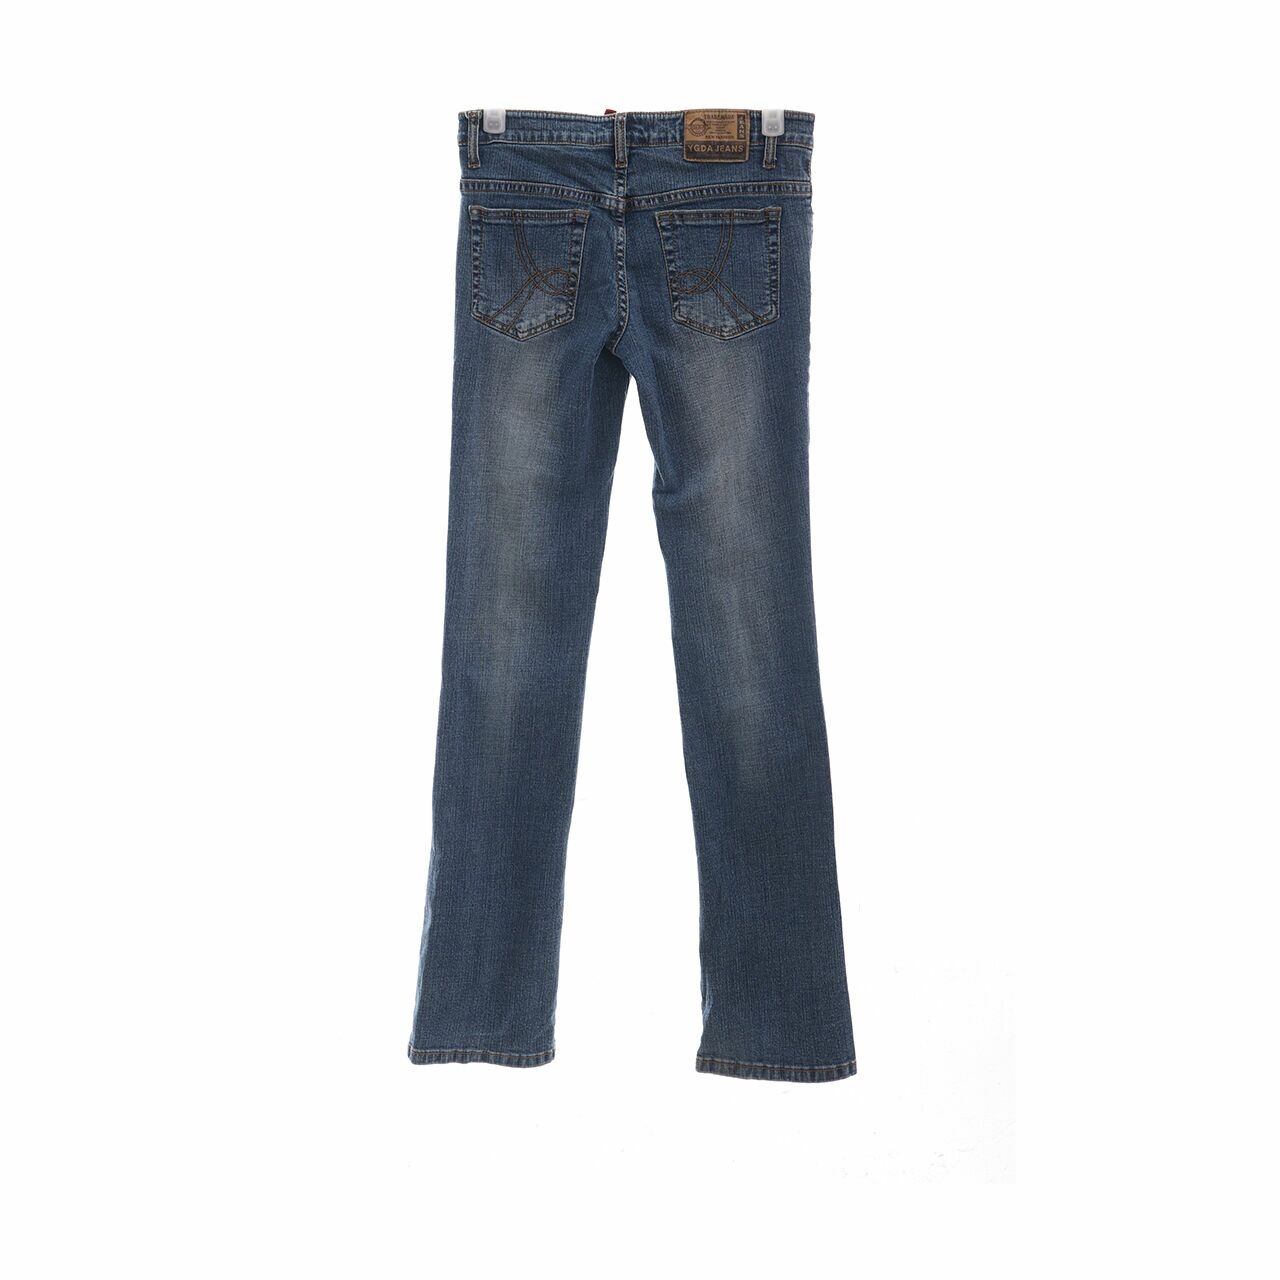 Private Collection Dark Blue Washed Denim Long Pants